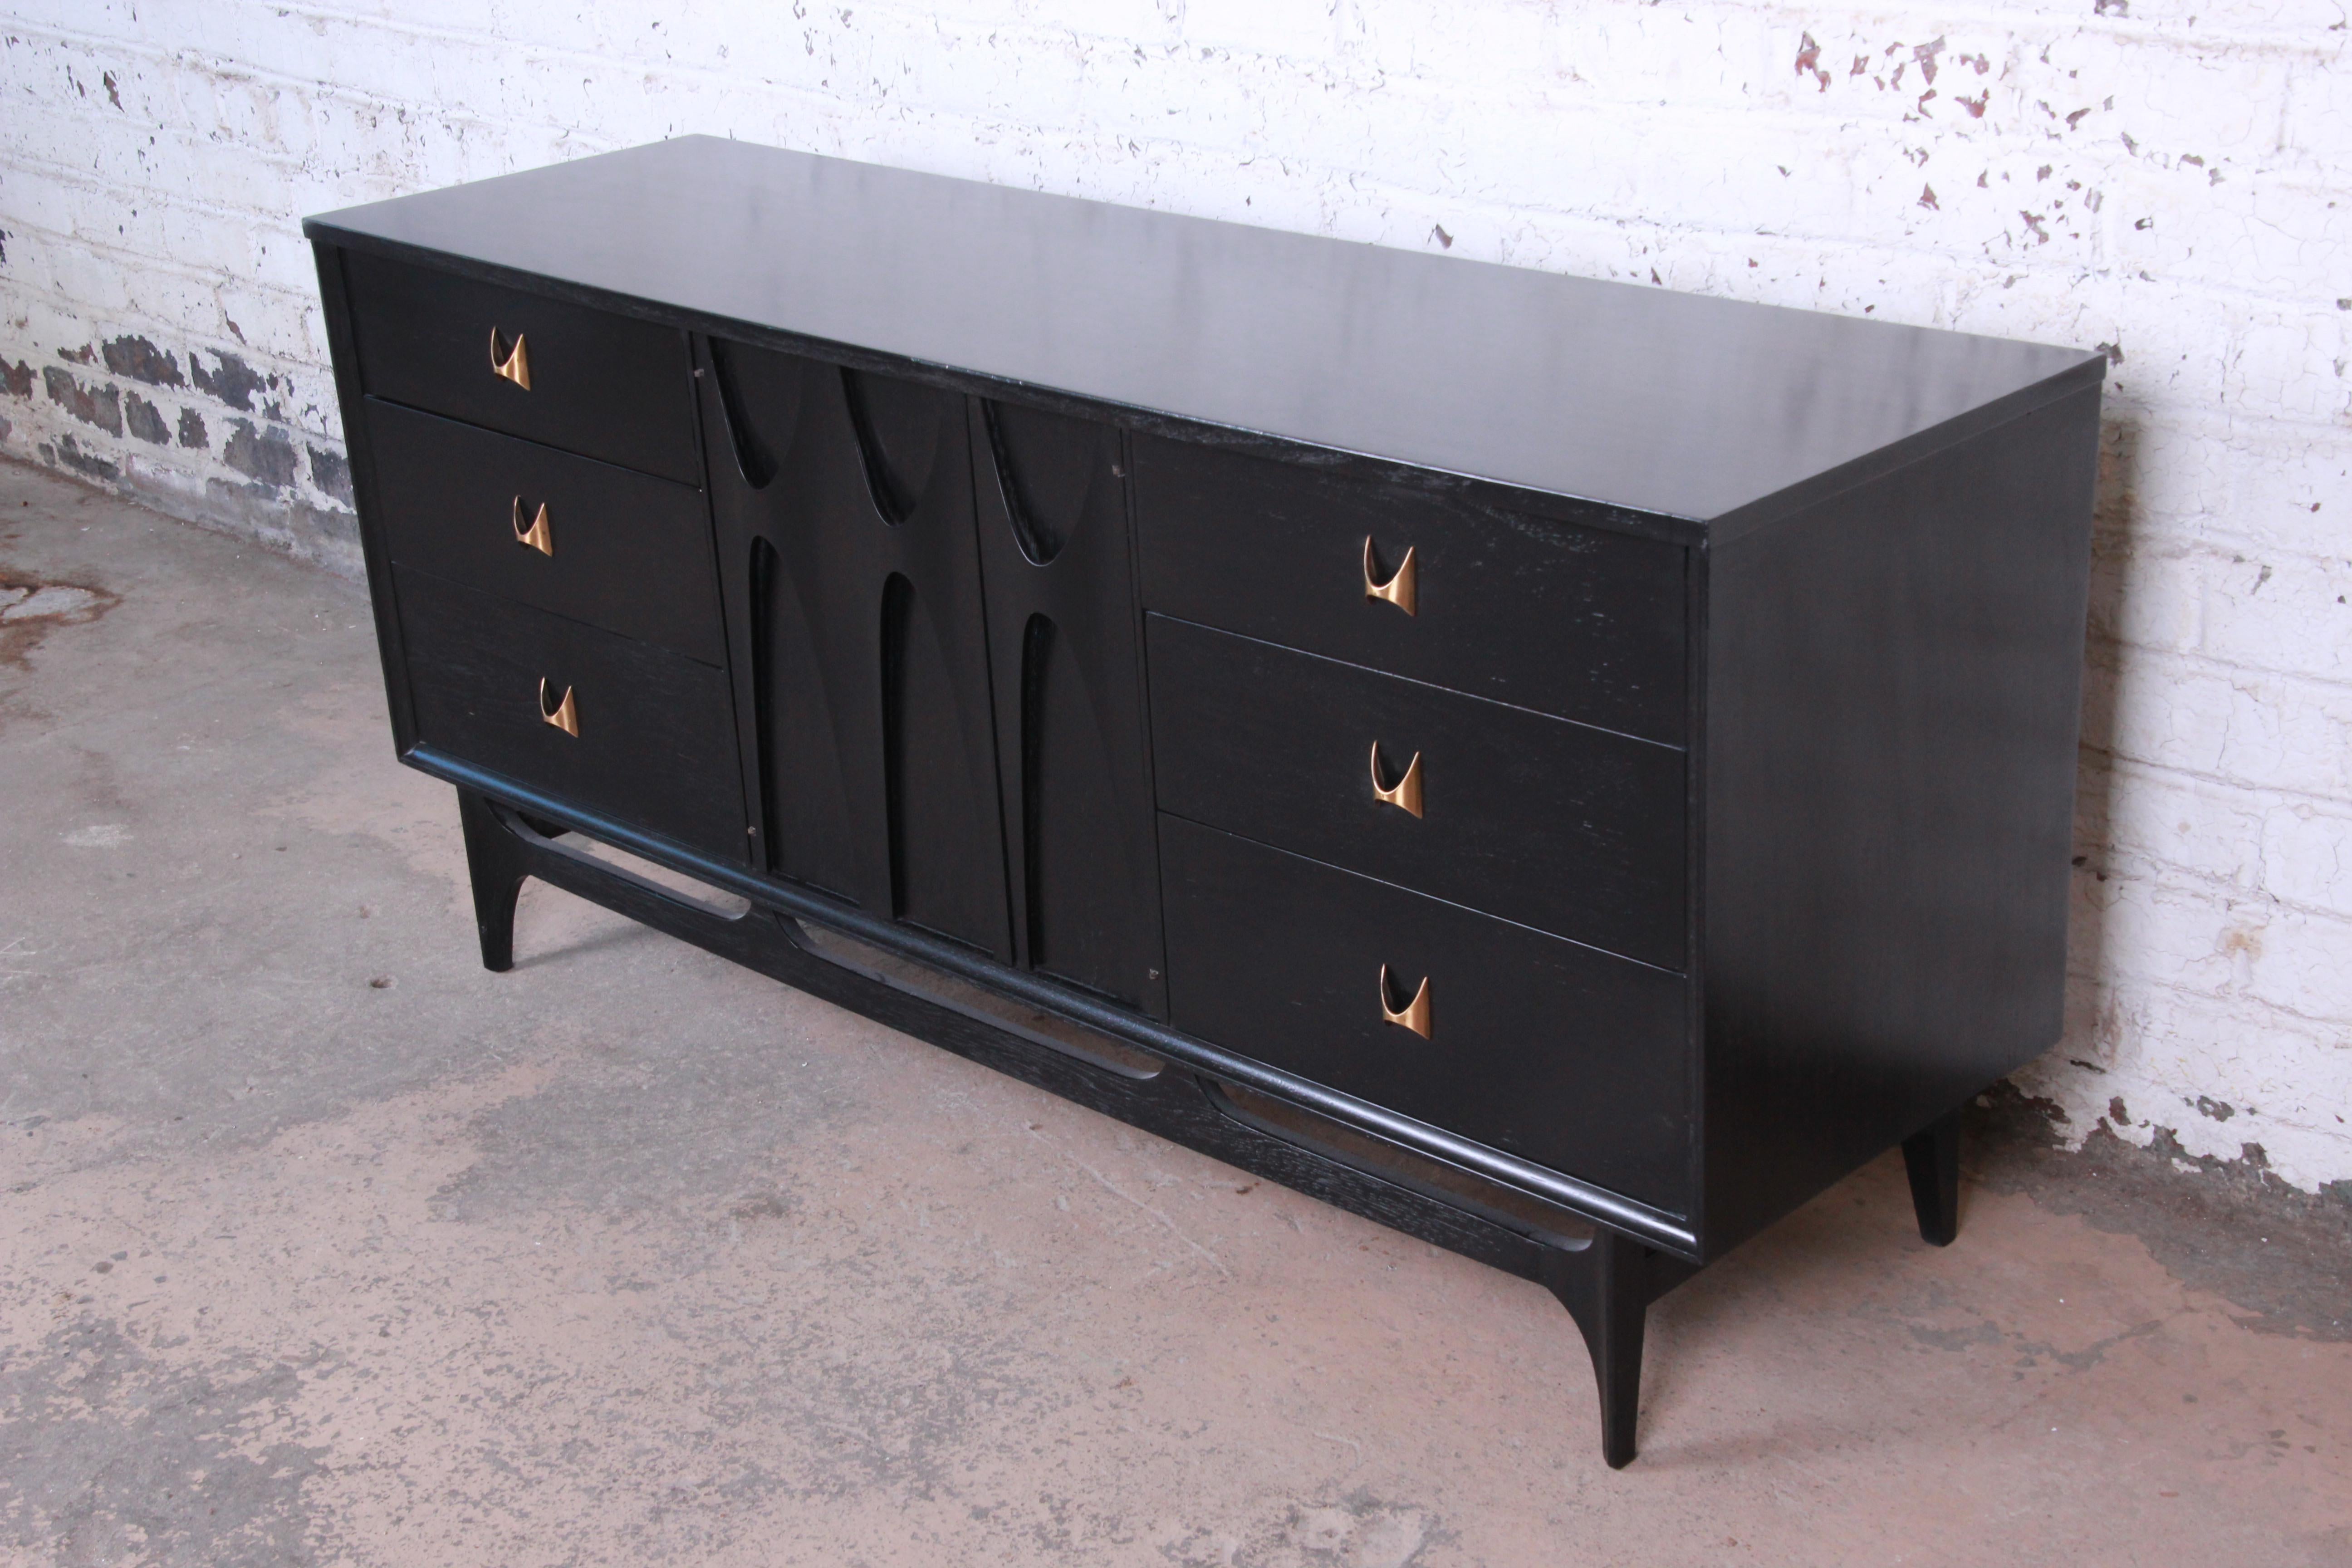 Offering a gorgeous Mid-Century Modern long dresser or credenza by Broyhill Brasilia. The dresser features the iconic sculpted walnut design with newly ebonized finish and original sculpted arch brass pulls. It offers ample room for storage, with